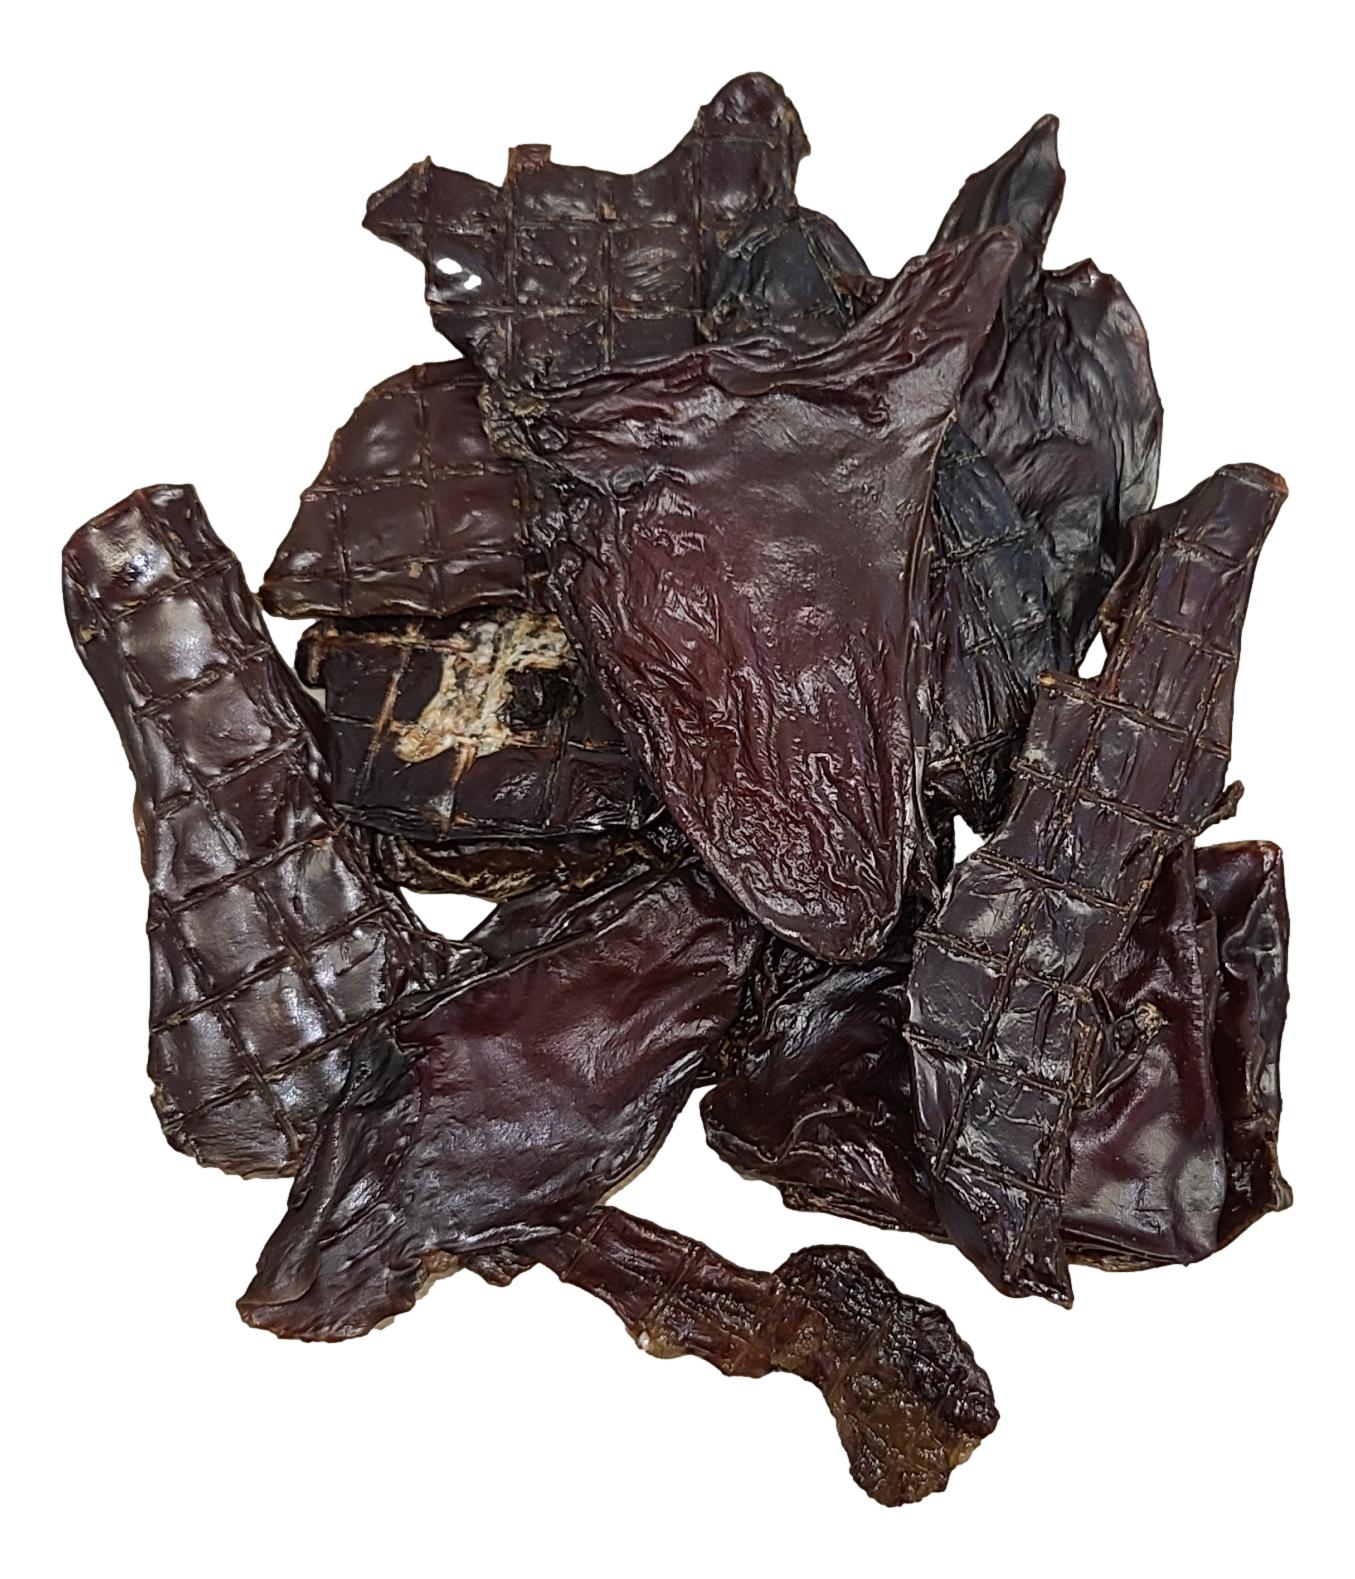 Duck Liver Jerky 85g - Only One Treats